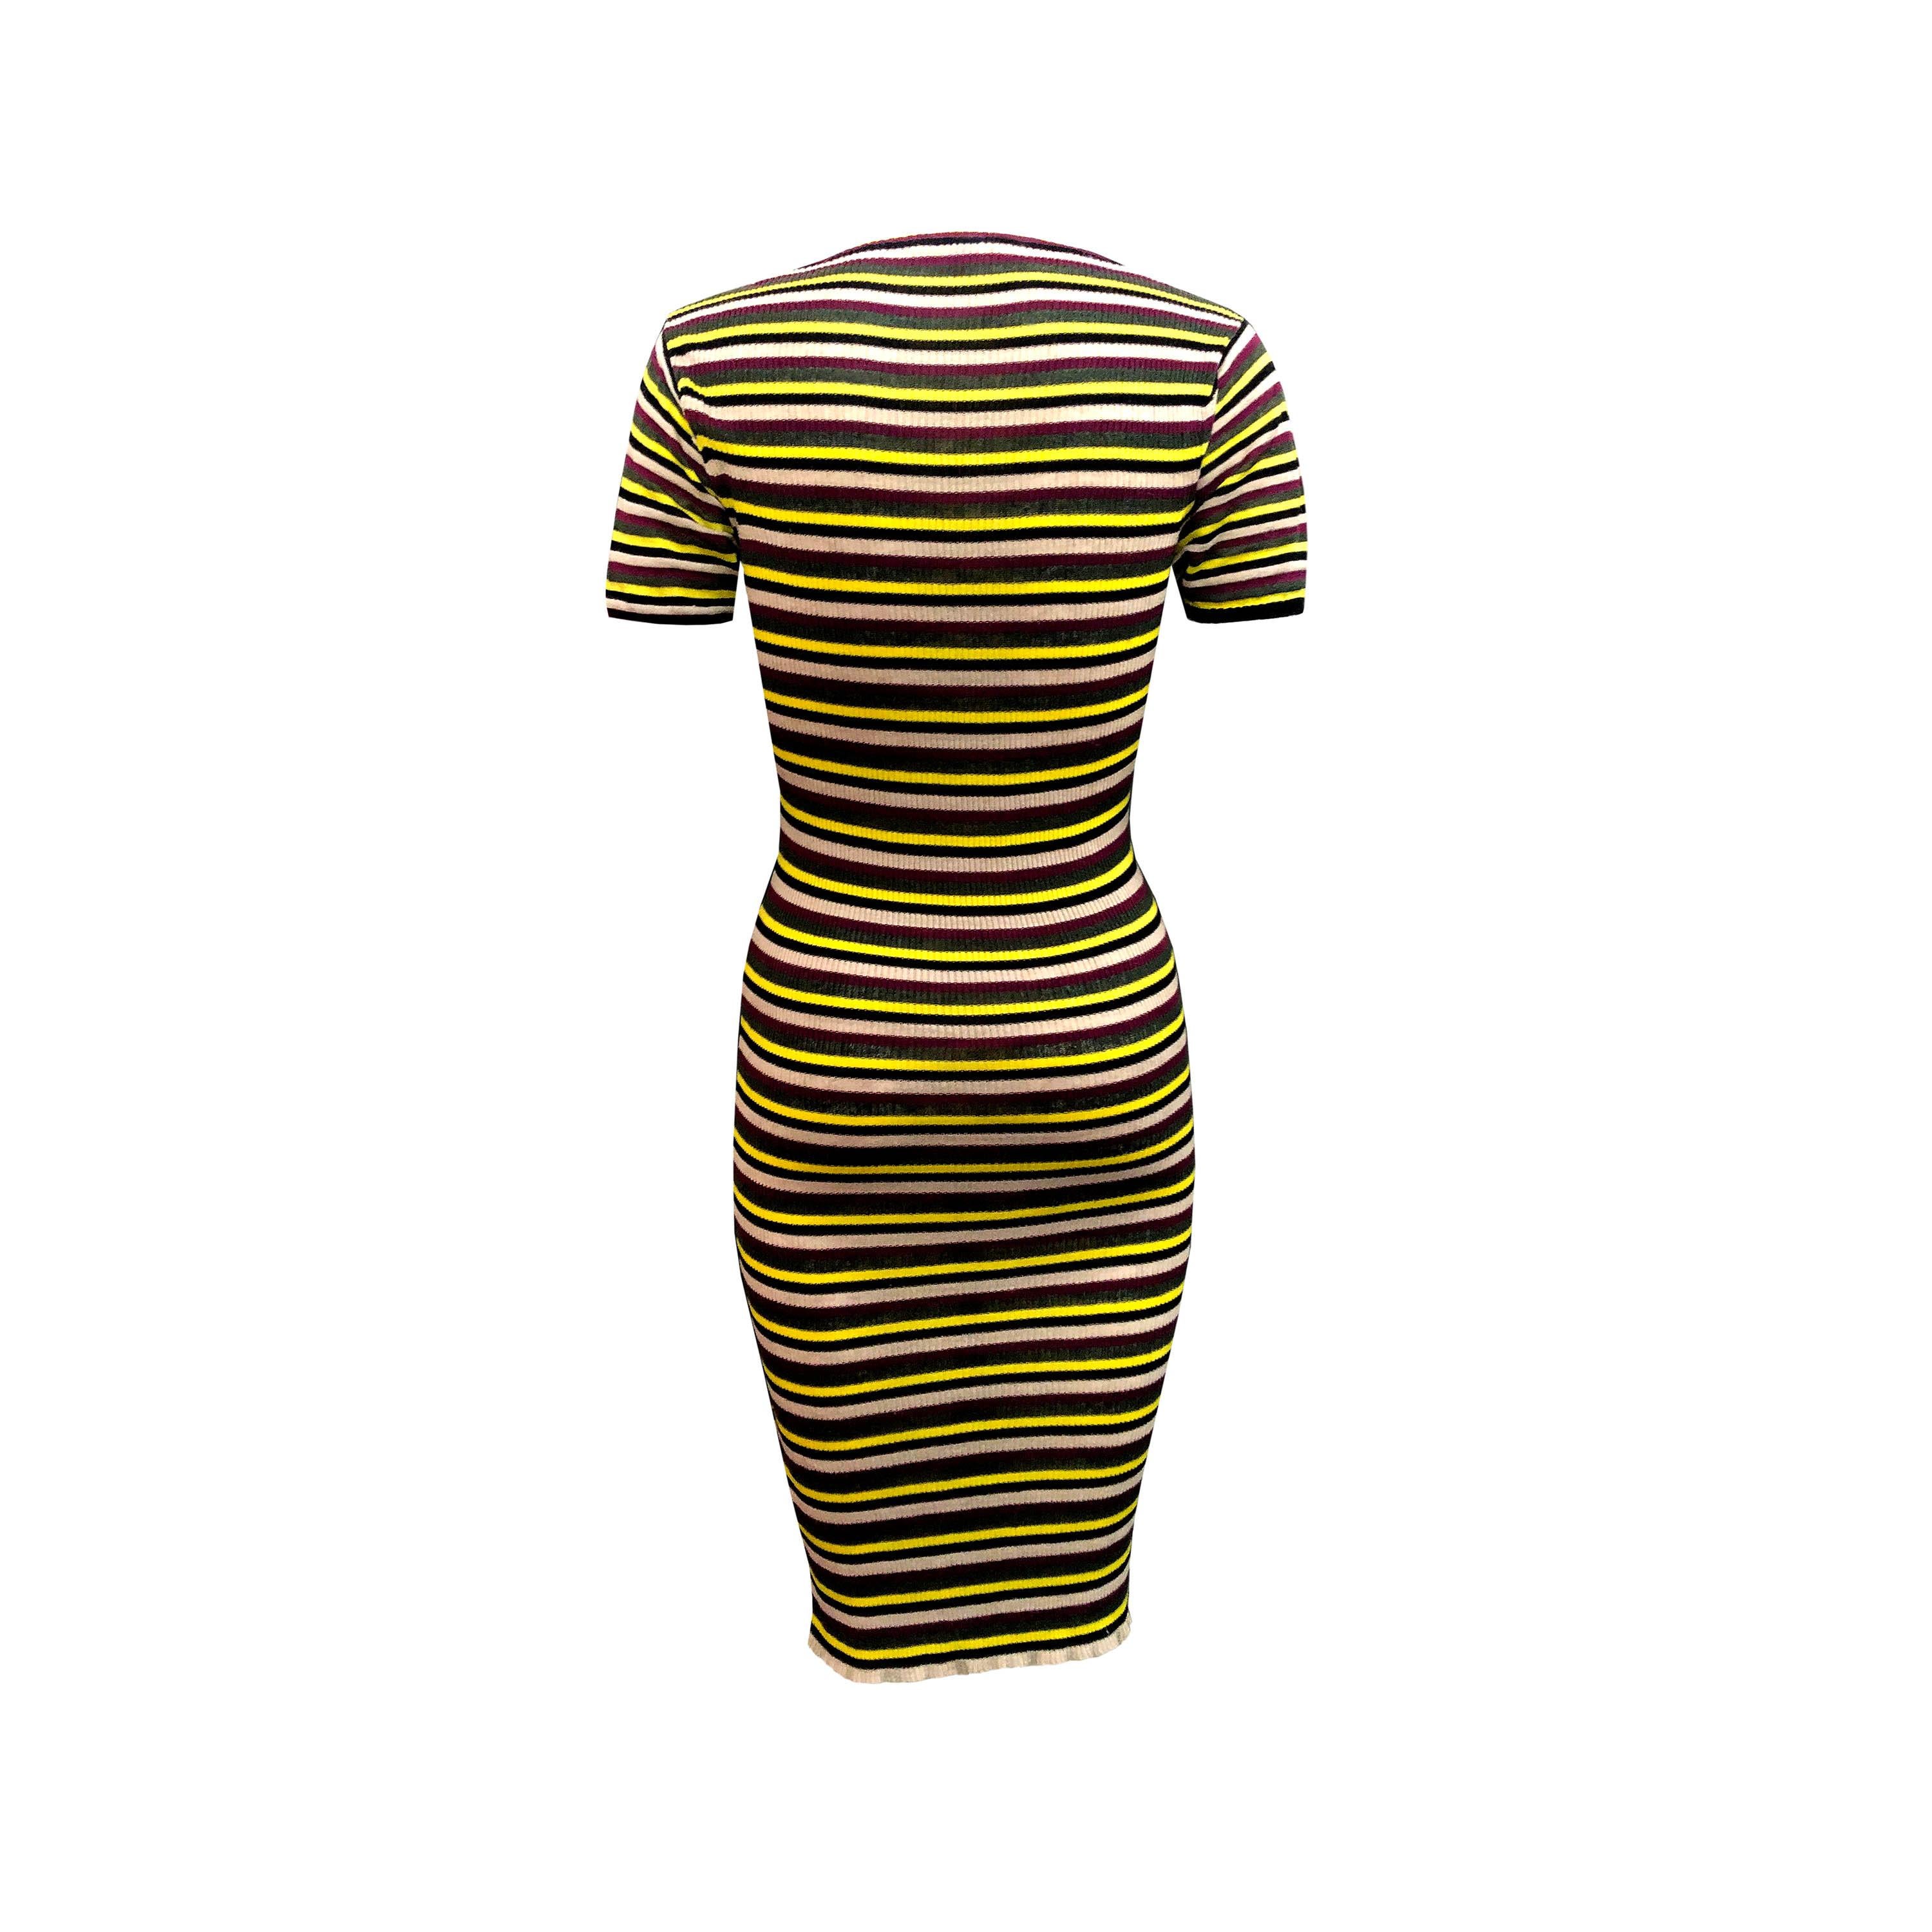 Vivienne Westwood Dress - Multi Striped Stretch Knit  In Excellent Condition For Sale In KENT, GB